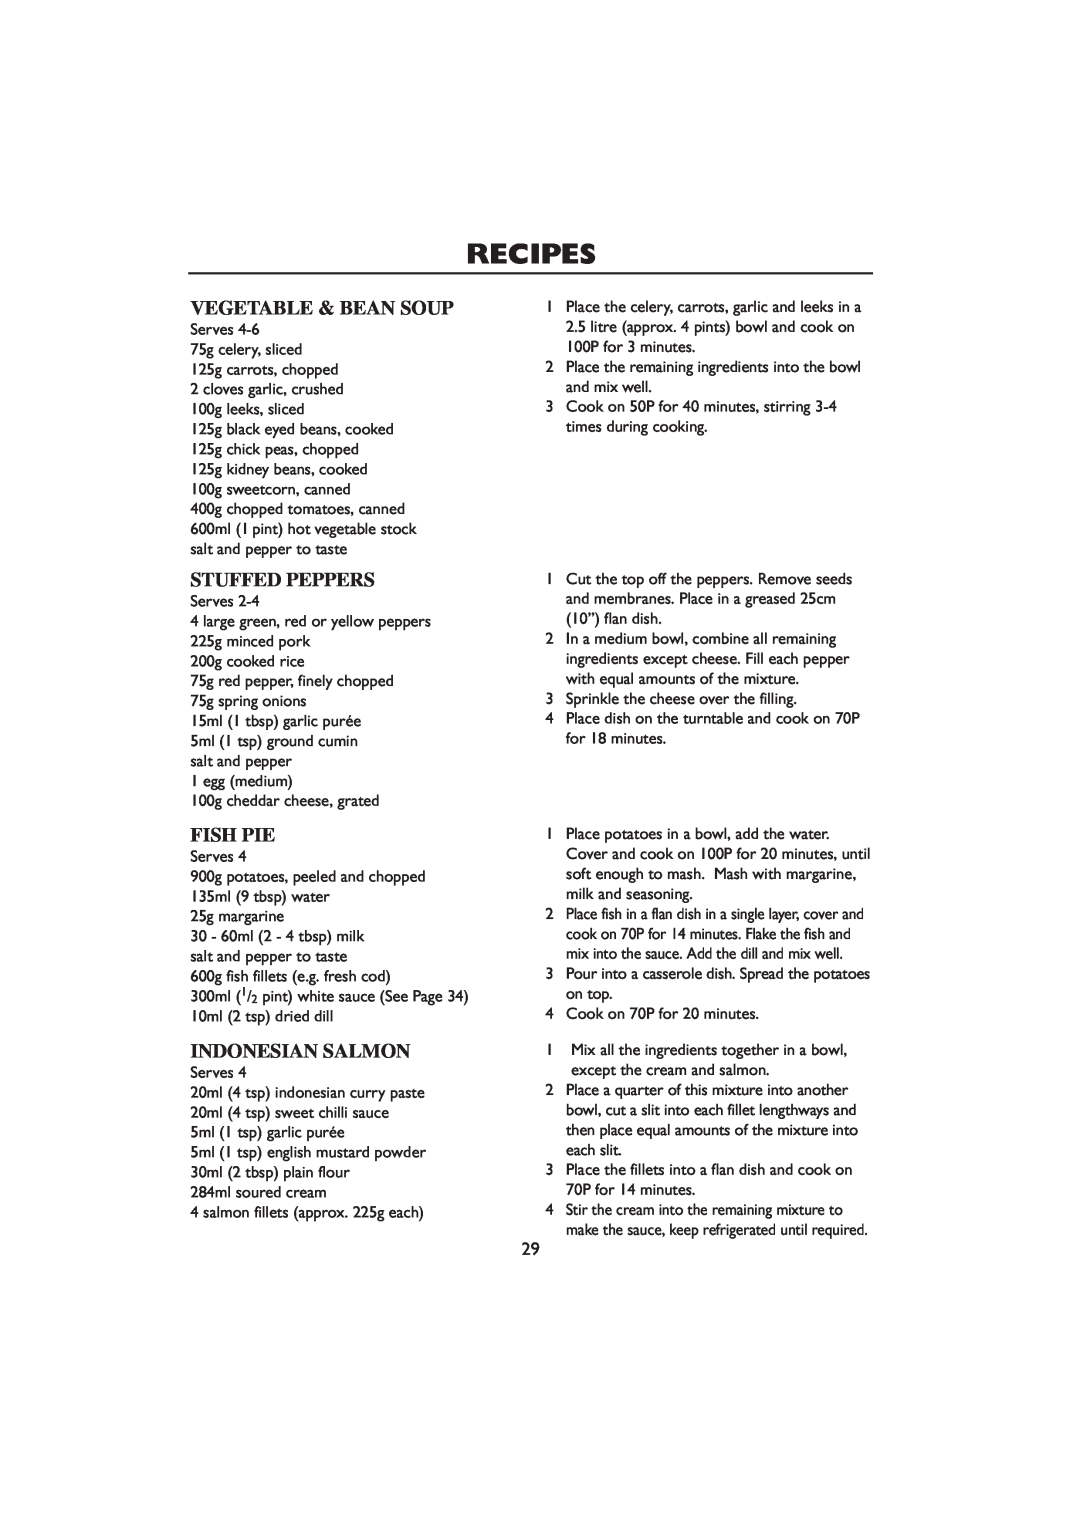 Sharp R-259 operation manual Vegetable & Bean Soup, Stuffed Peppers, Fish Pie, Indonesian Salmon, Recipes 